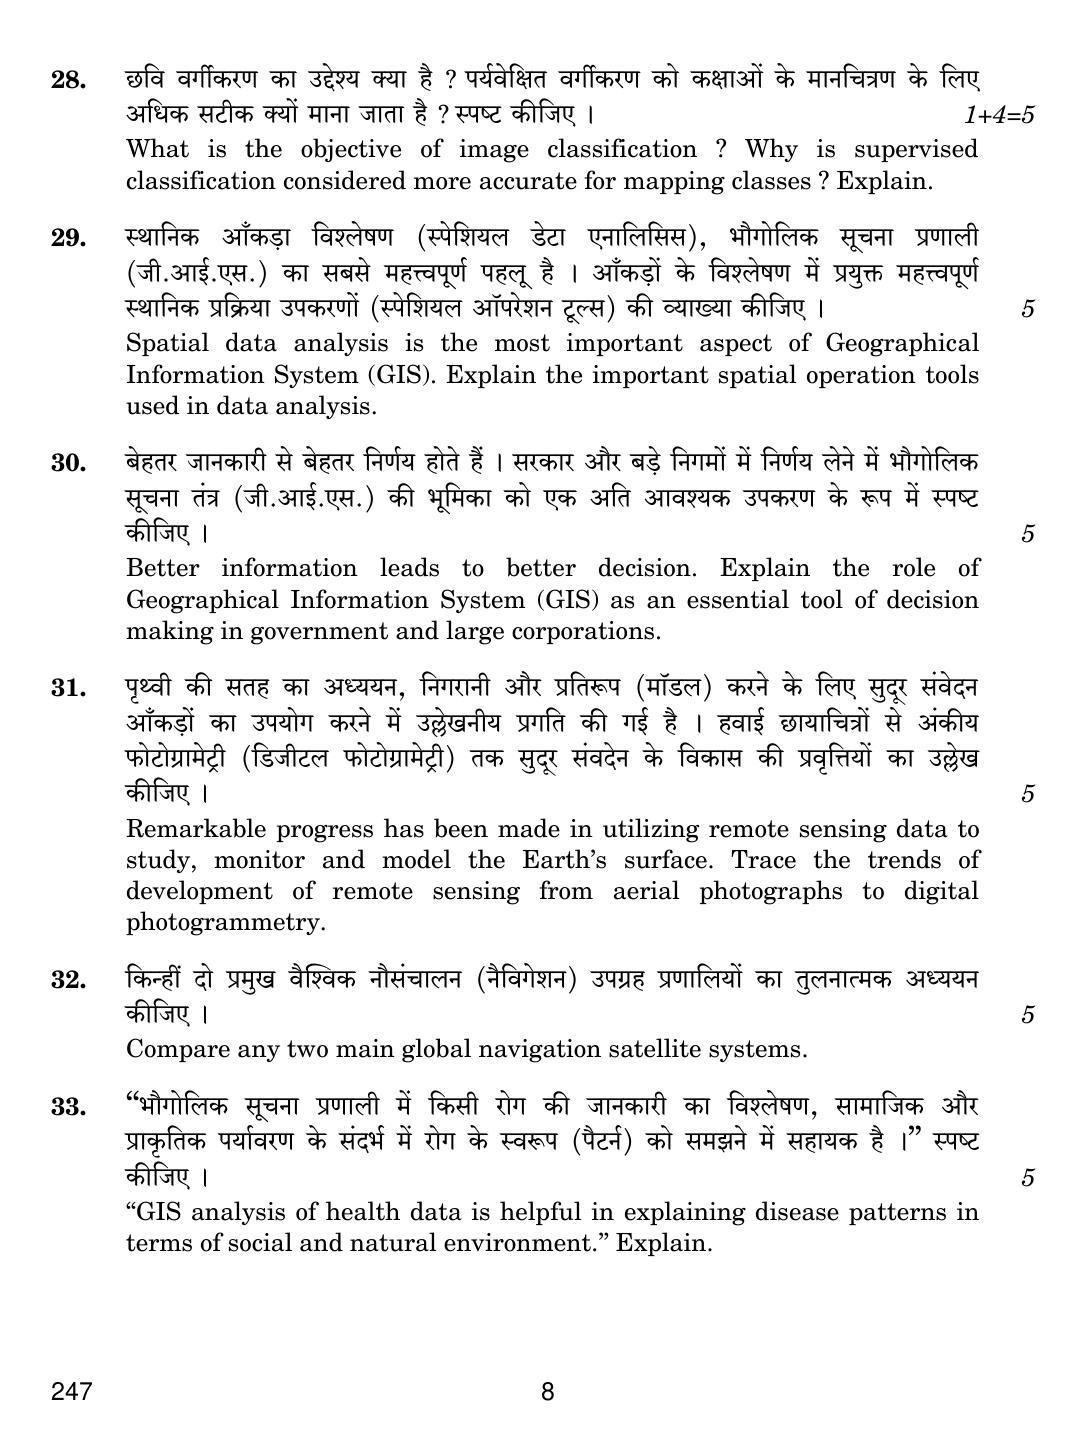 CBSE Class 12 247 Geospatial Technology 2019 Question Paper - Page 8